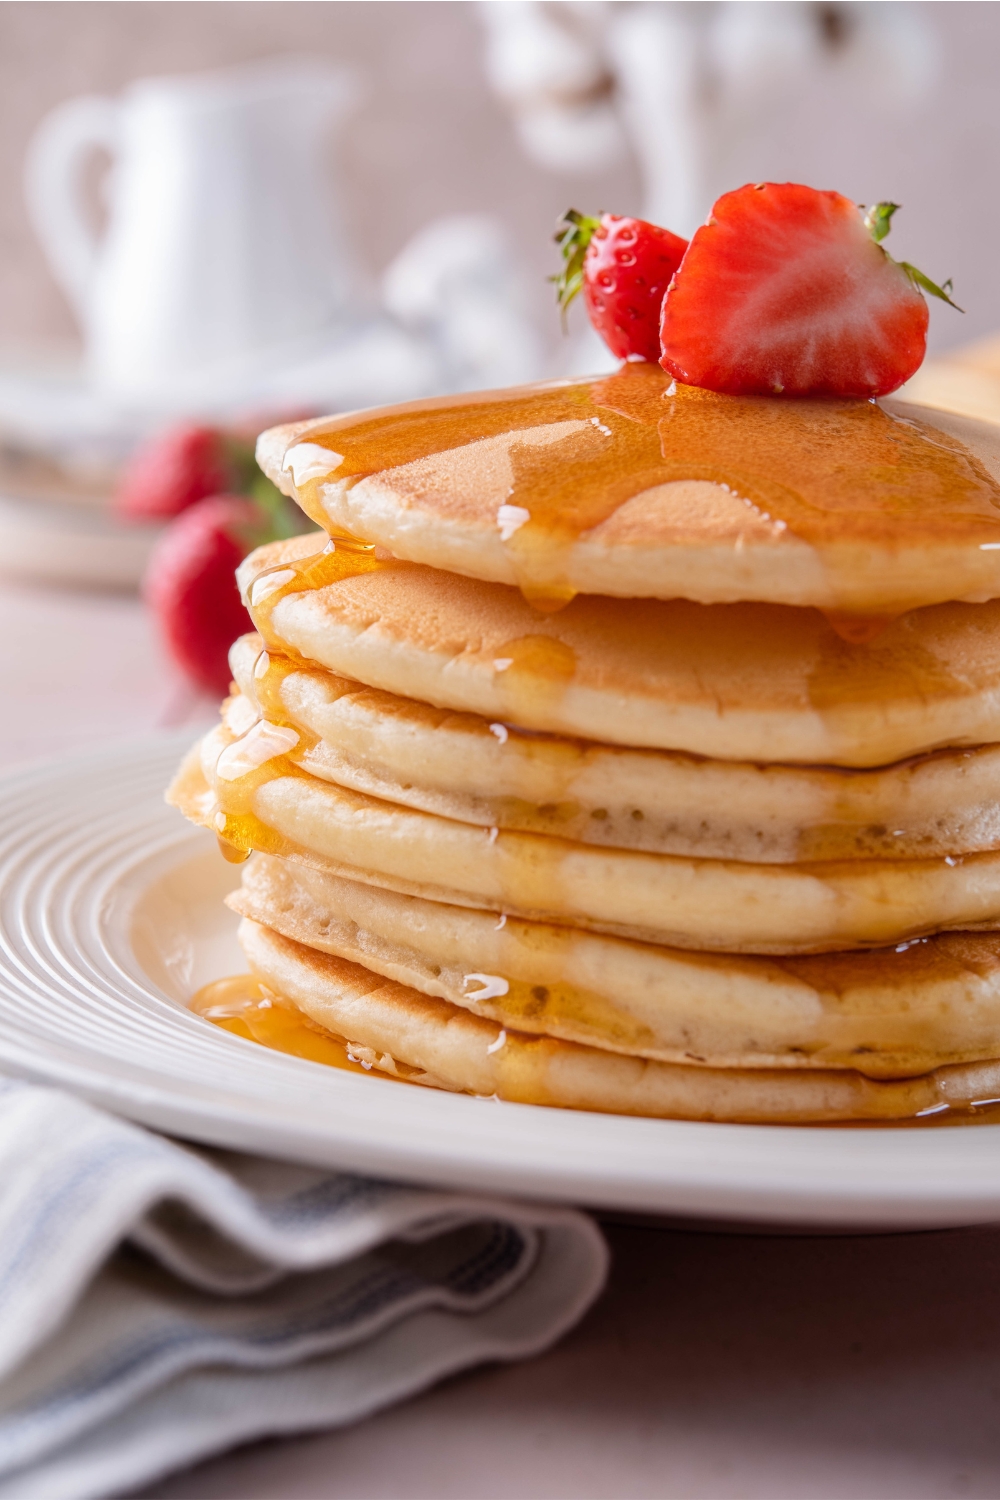 A plate with a stack of pancakes topped with sliced strawberries and fresh maple syrup.